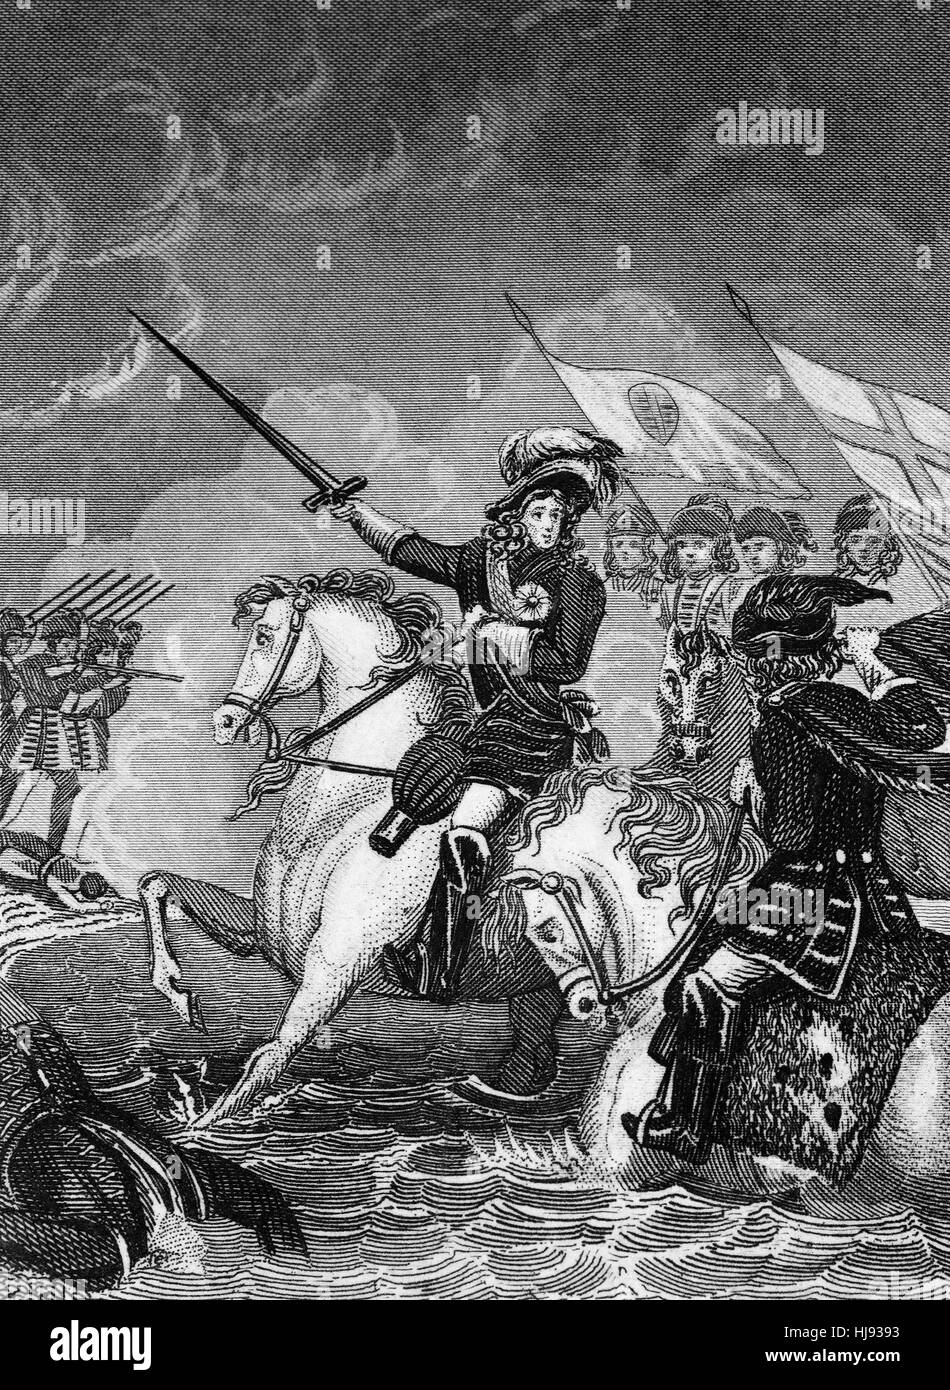 William of Orange leading his army at the Battle of the Boyne in 1690  against the English King James II. The battle took place across the River Boyne near the town of Drogheda on the east coast of Ireland, and resulted in a victory for William. This turned the tide in James's failed attempt to regain the British crown and ultimately aided in ensuring the continued Protestant ascendancy in Ireland. Stock Photo